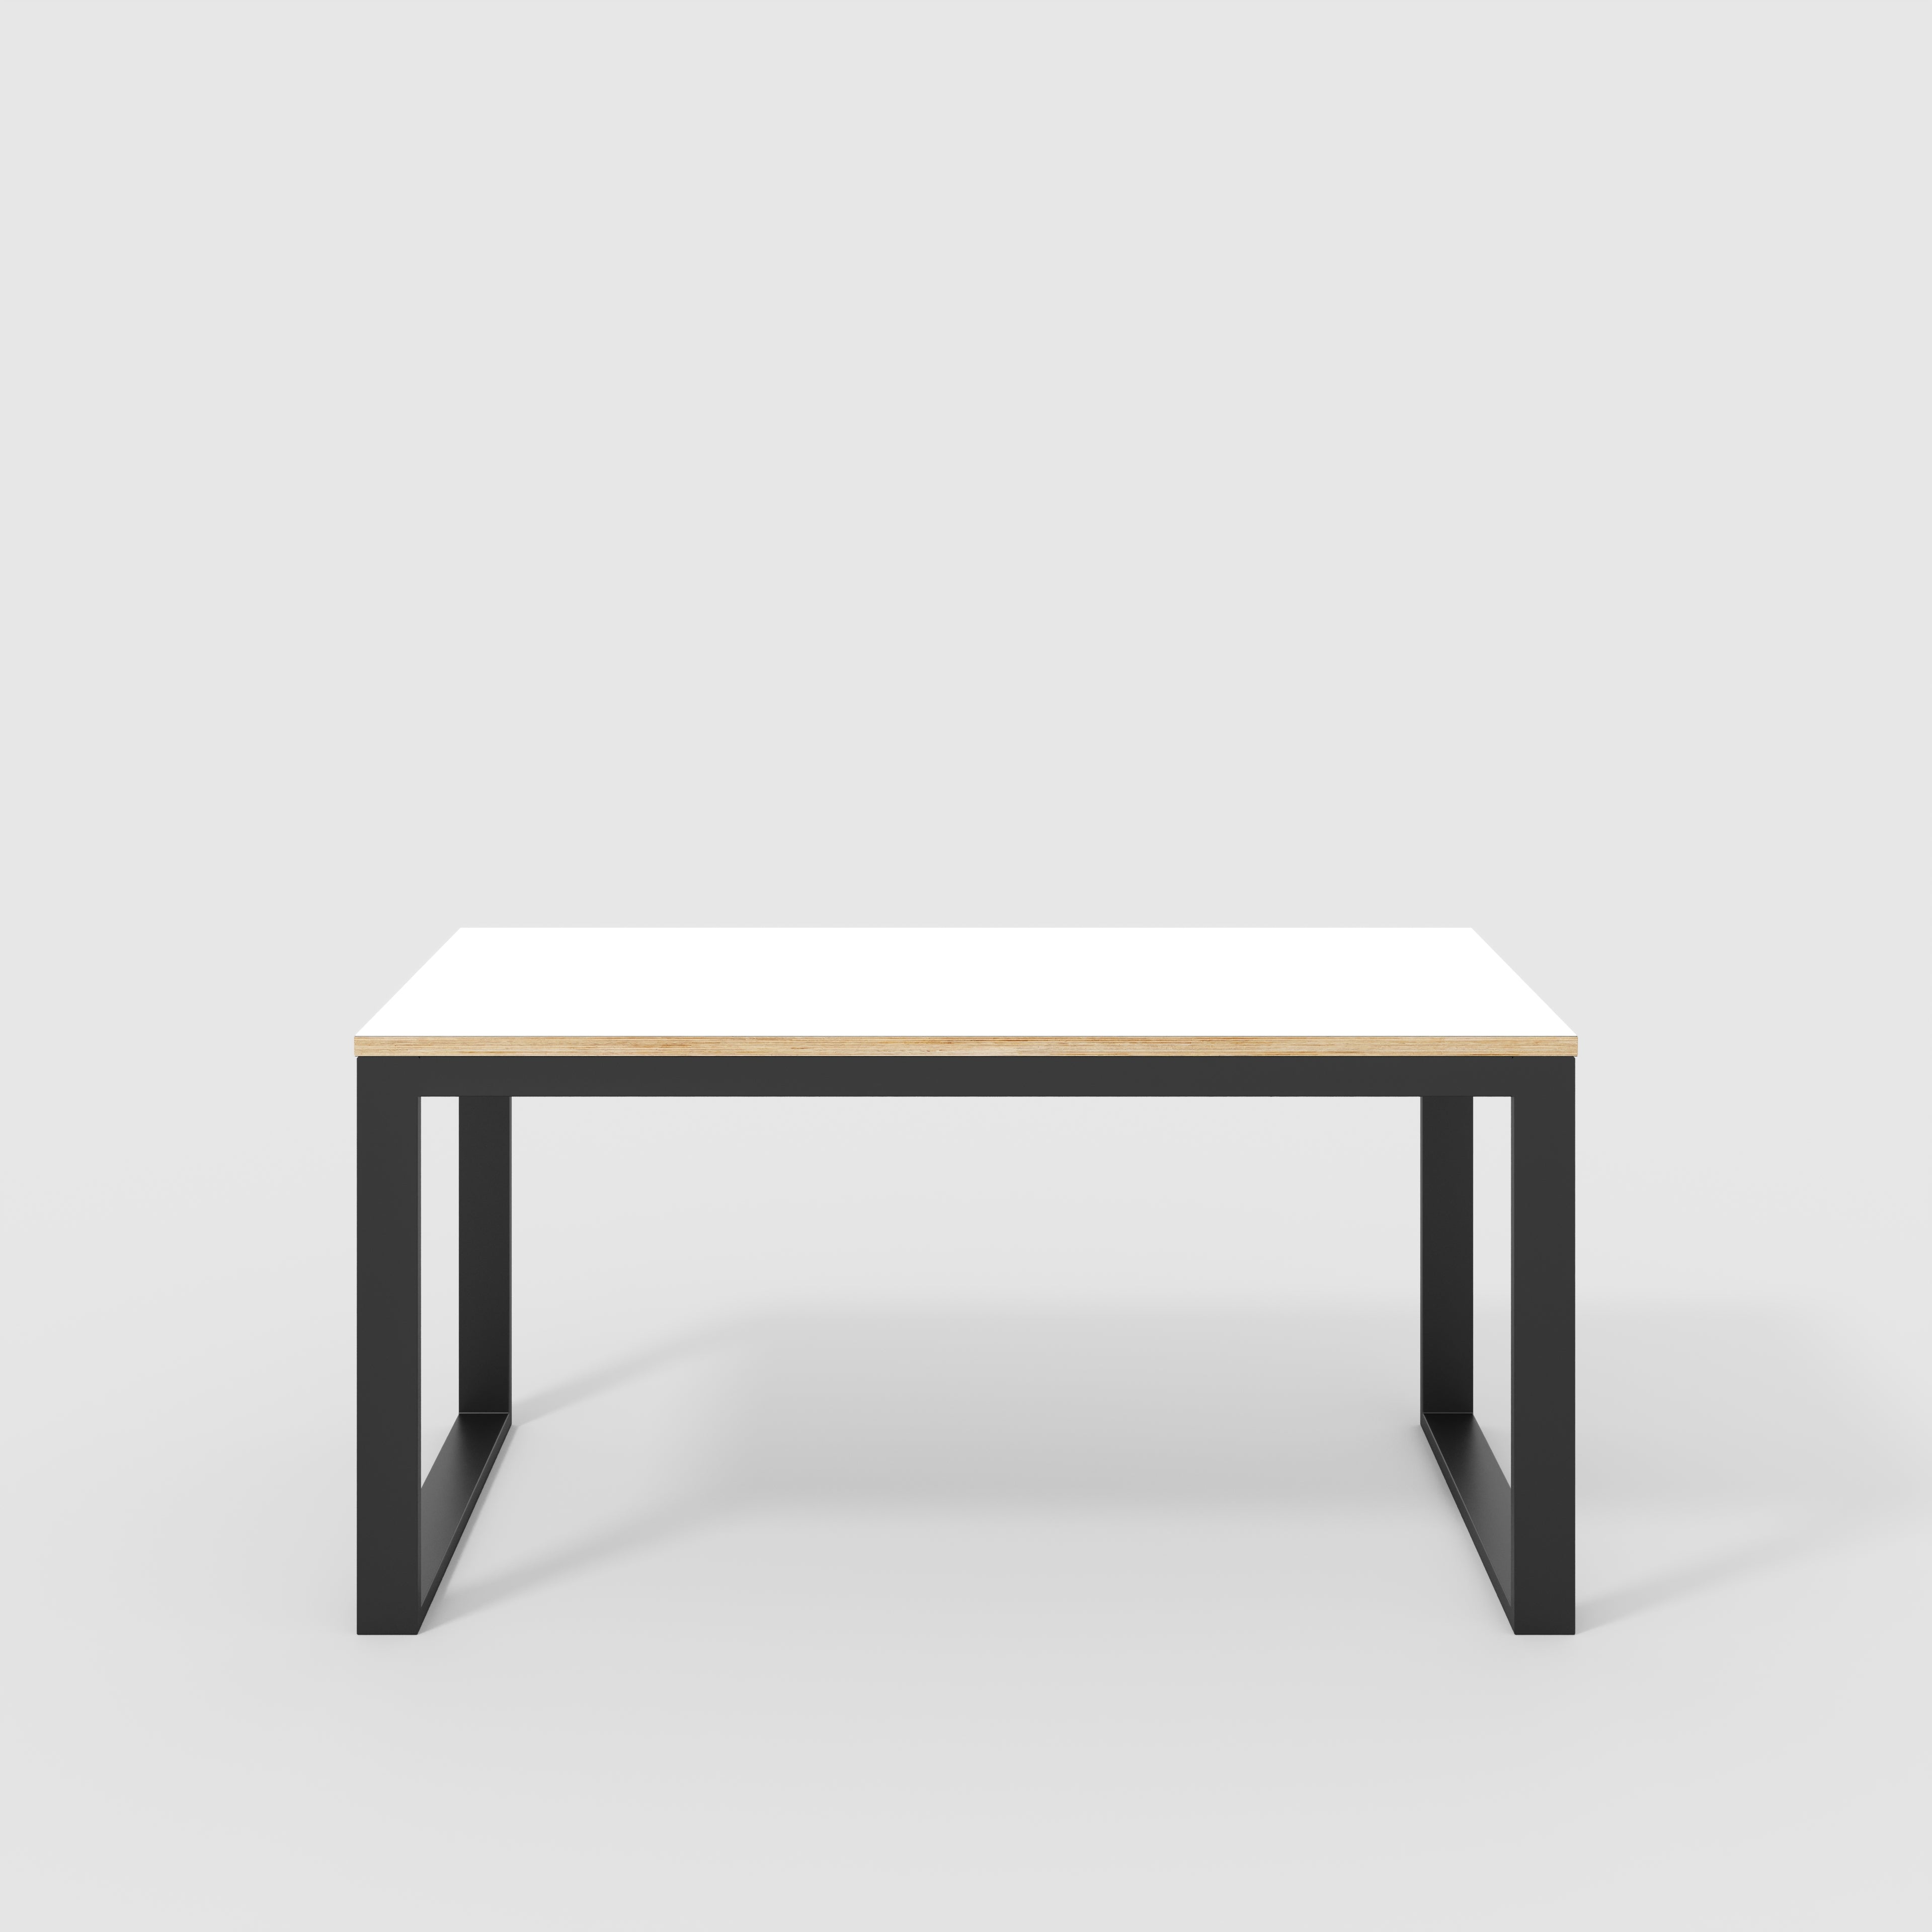 Table with Black Industrial Frame - Formica White - 1500(w) x 745(d) x 735(h)